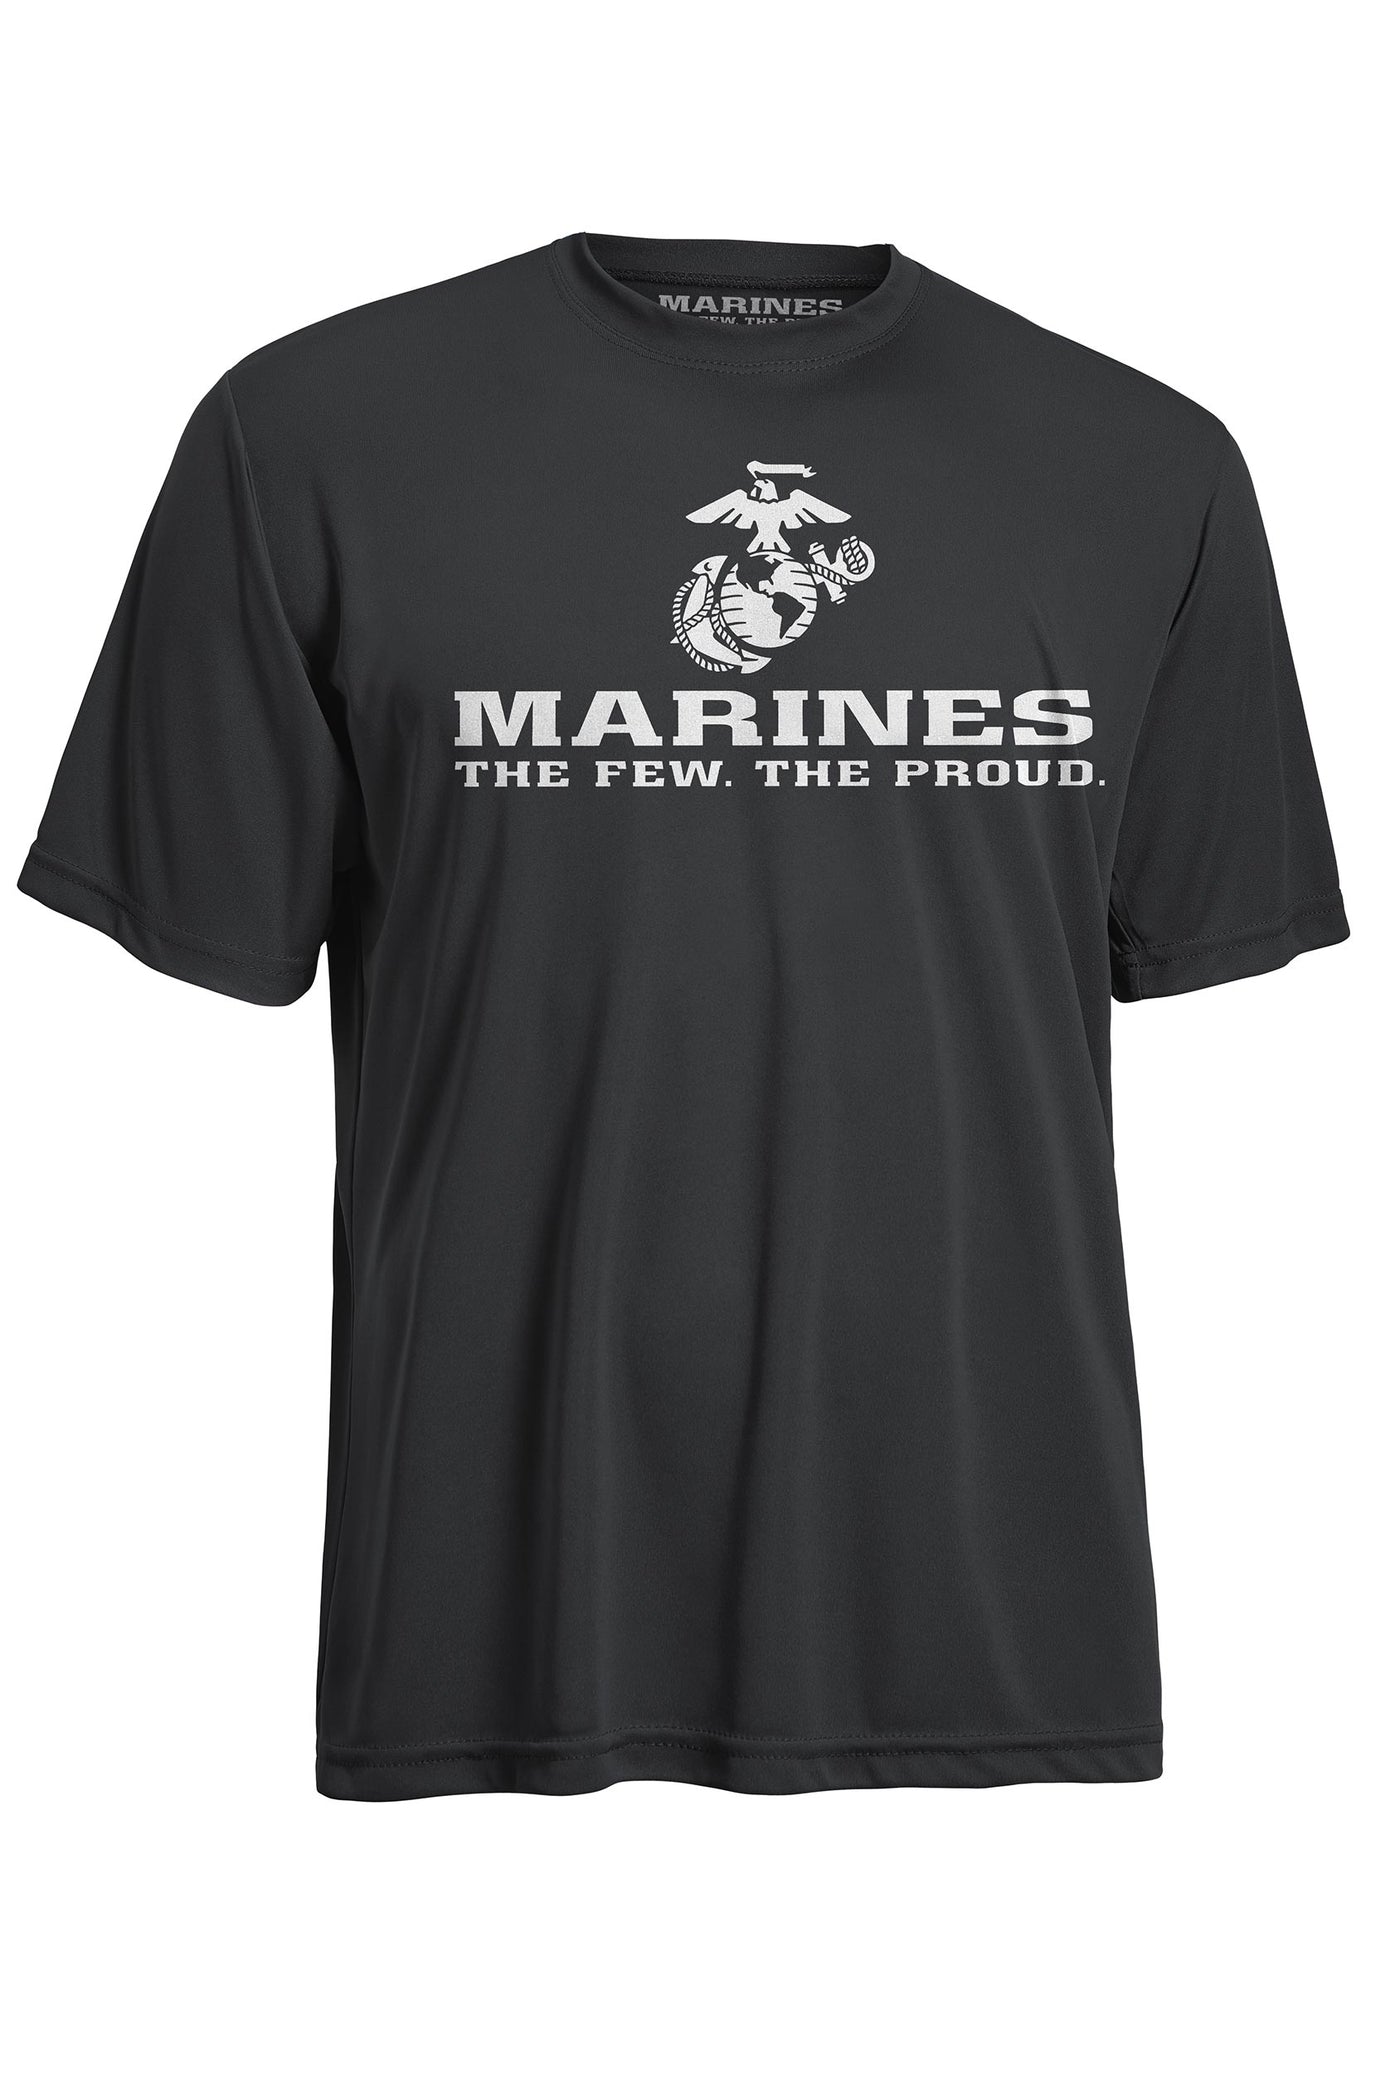 Marines Corps The Proud Drimax™ Performance T-Shirt 🇺🇸 - Expert Brand Apparel